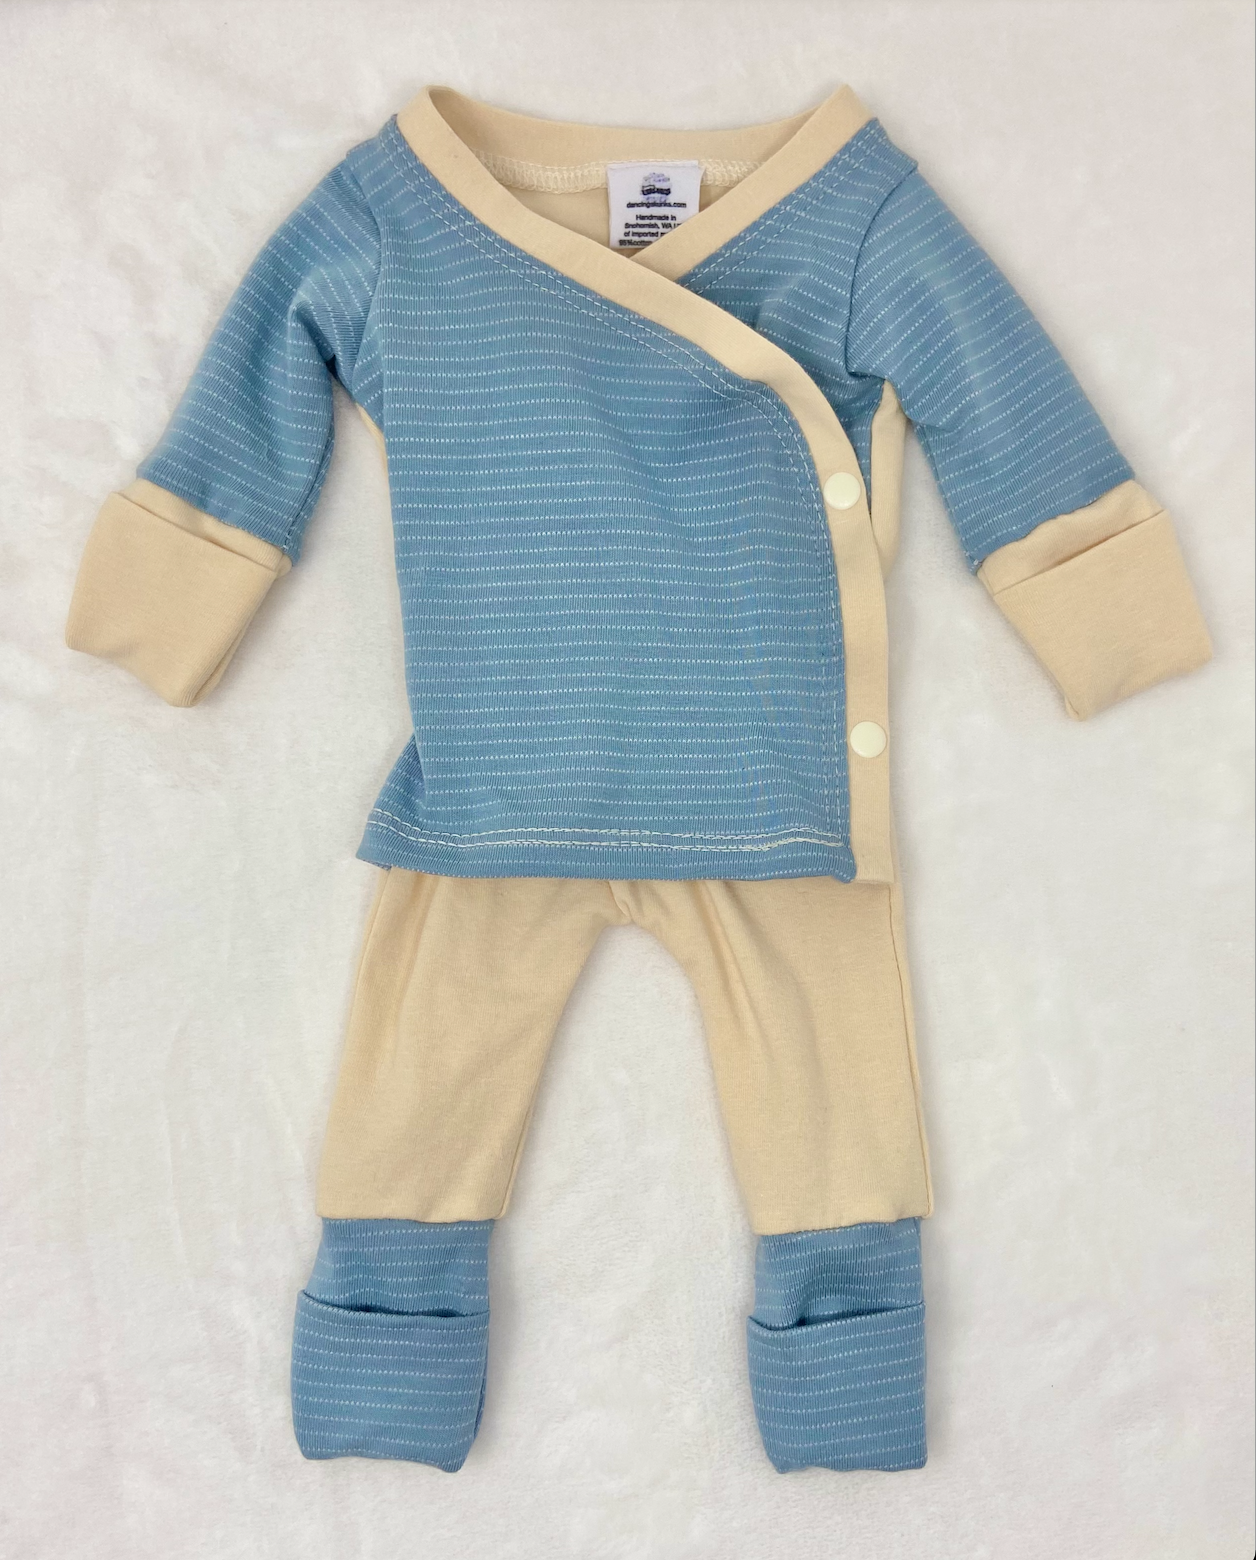 Newborn clothes, Newborn romper, baby clothes, baby boy outfit, going home outfit, NICU clothes, NICU outfit, skin to skin with baby, grow with me outfit for baby, baby girl clothes, preemie clothes, preemie outfit